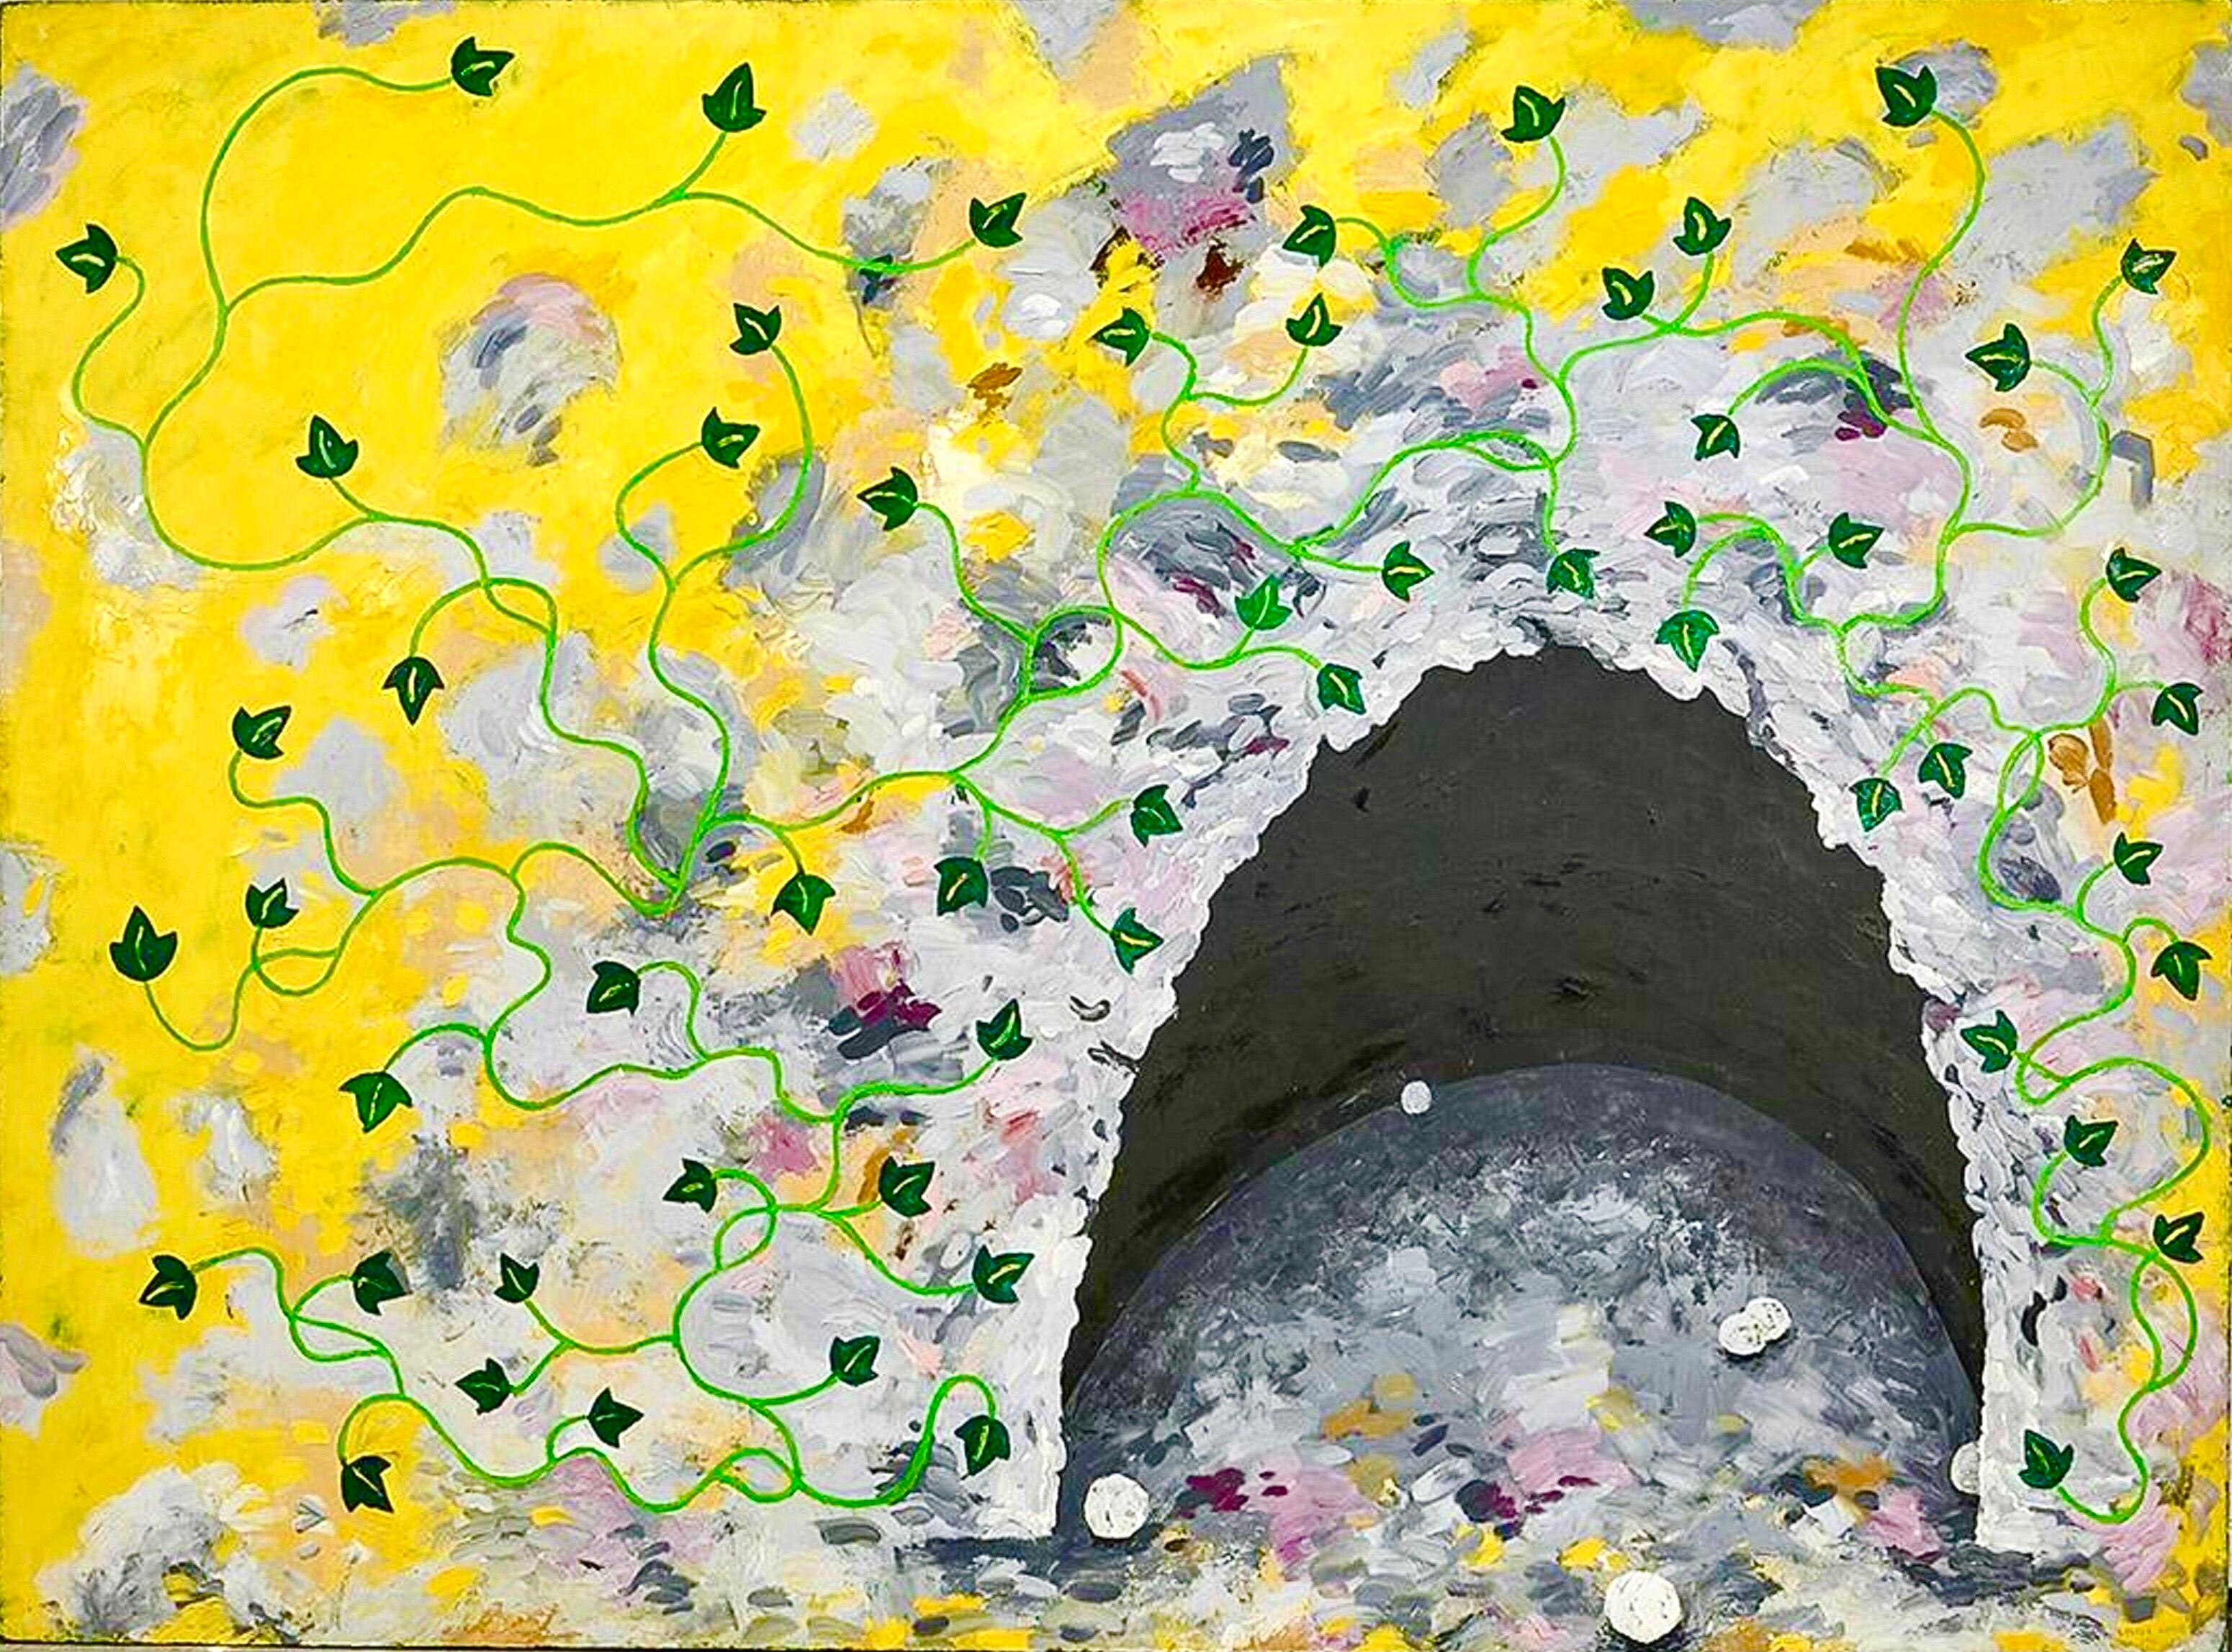 Title: Grotto
Dated: 1981
Size: 72 X 96 inches
Technique: Oil paint on canvas
Provenance: Robert Miller Gallery New York

This is a large magnificent, Neo figurative, expressionist painting. A bright, vibrant piece in yellow and purple, green, gray